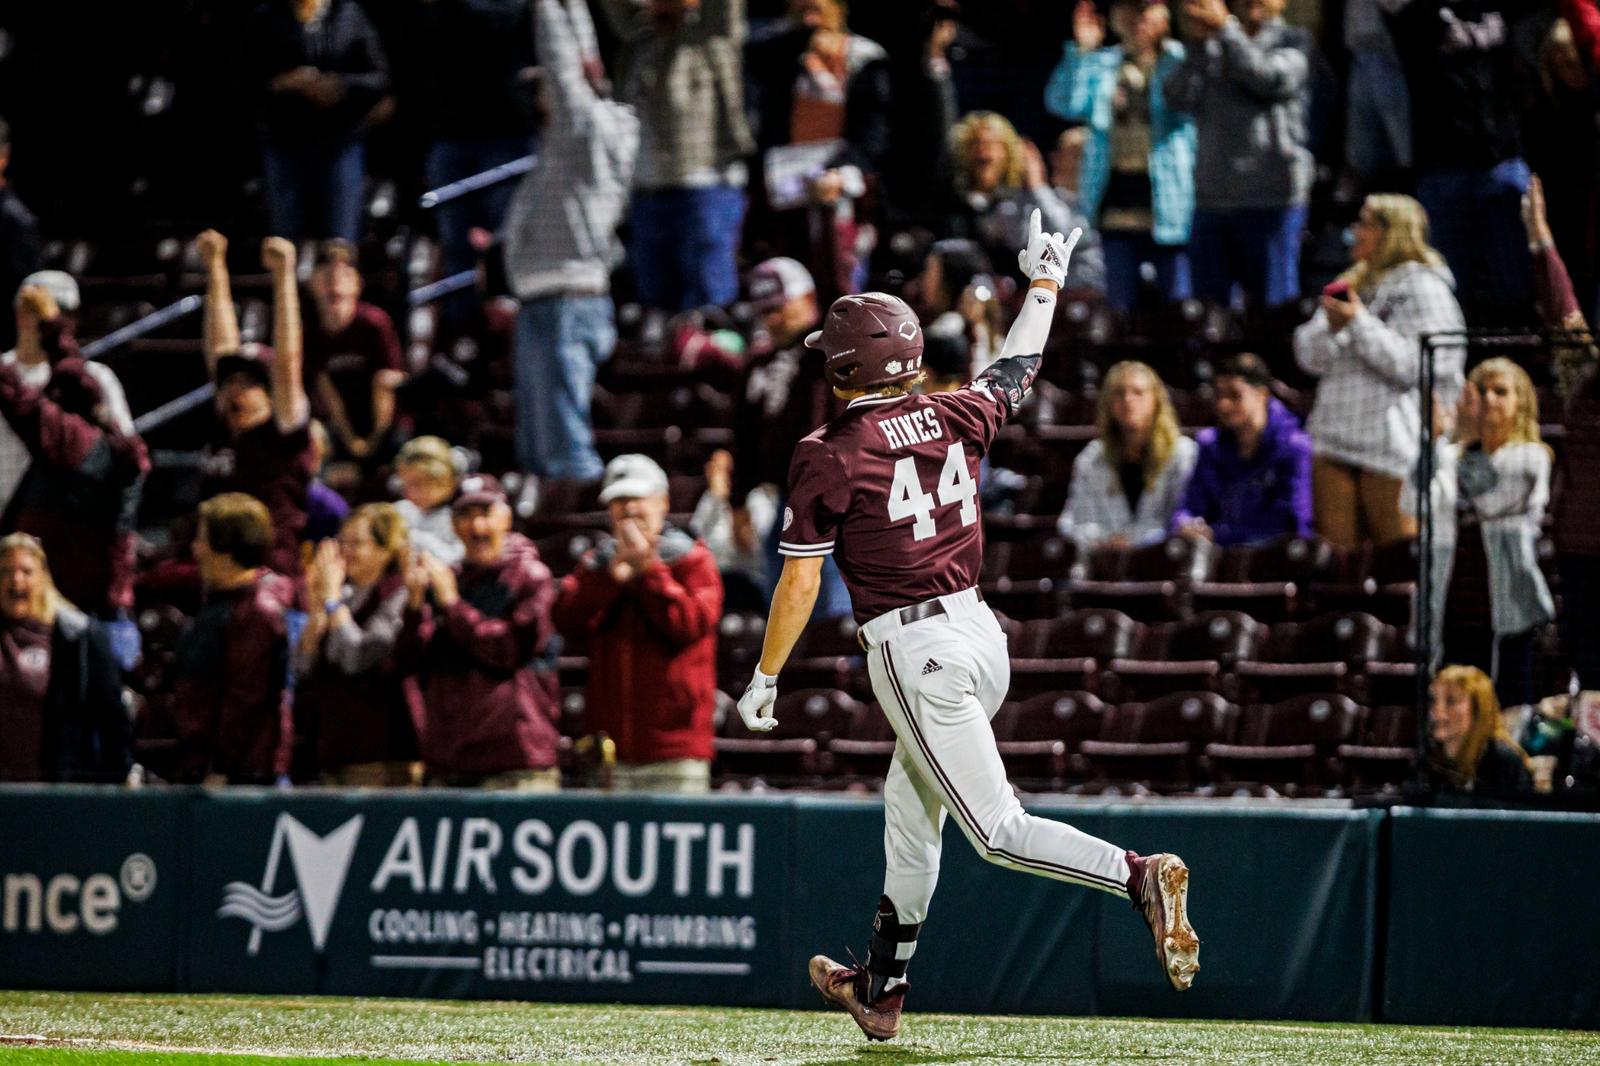 Mississippi State Defeats No. 11 Vanderbilt 7-4 in Game Two: Hines’ Heroics Lead the Way